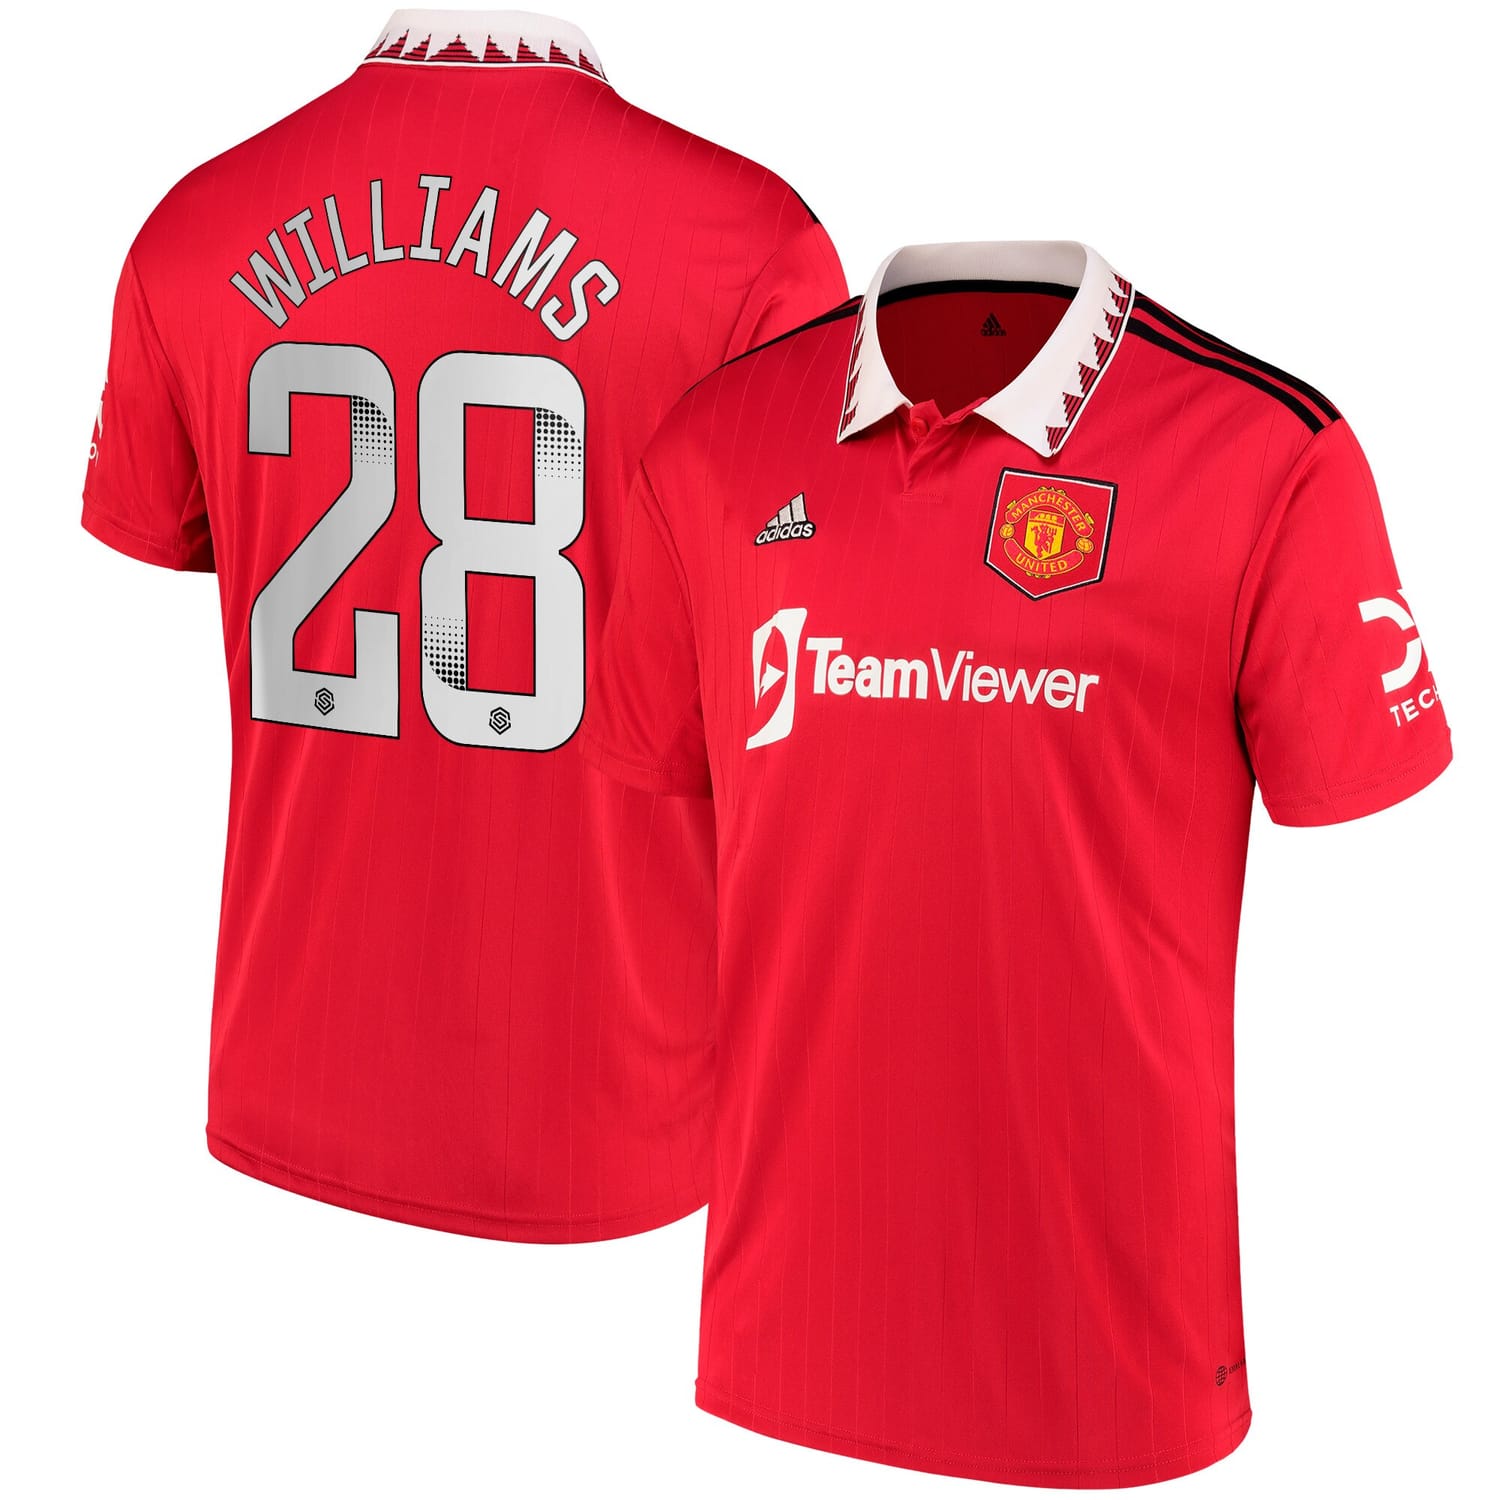 Premier League Manchester United Home WSL Jersey Shirt 2022-23 player Rachel Williams 28 printing for Men